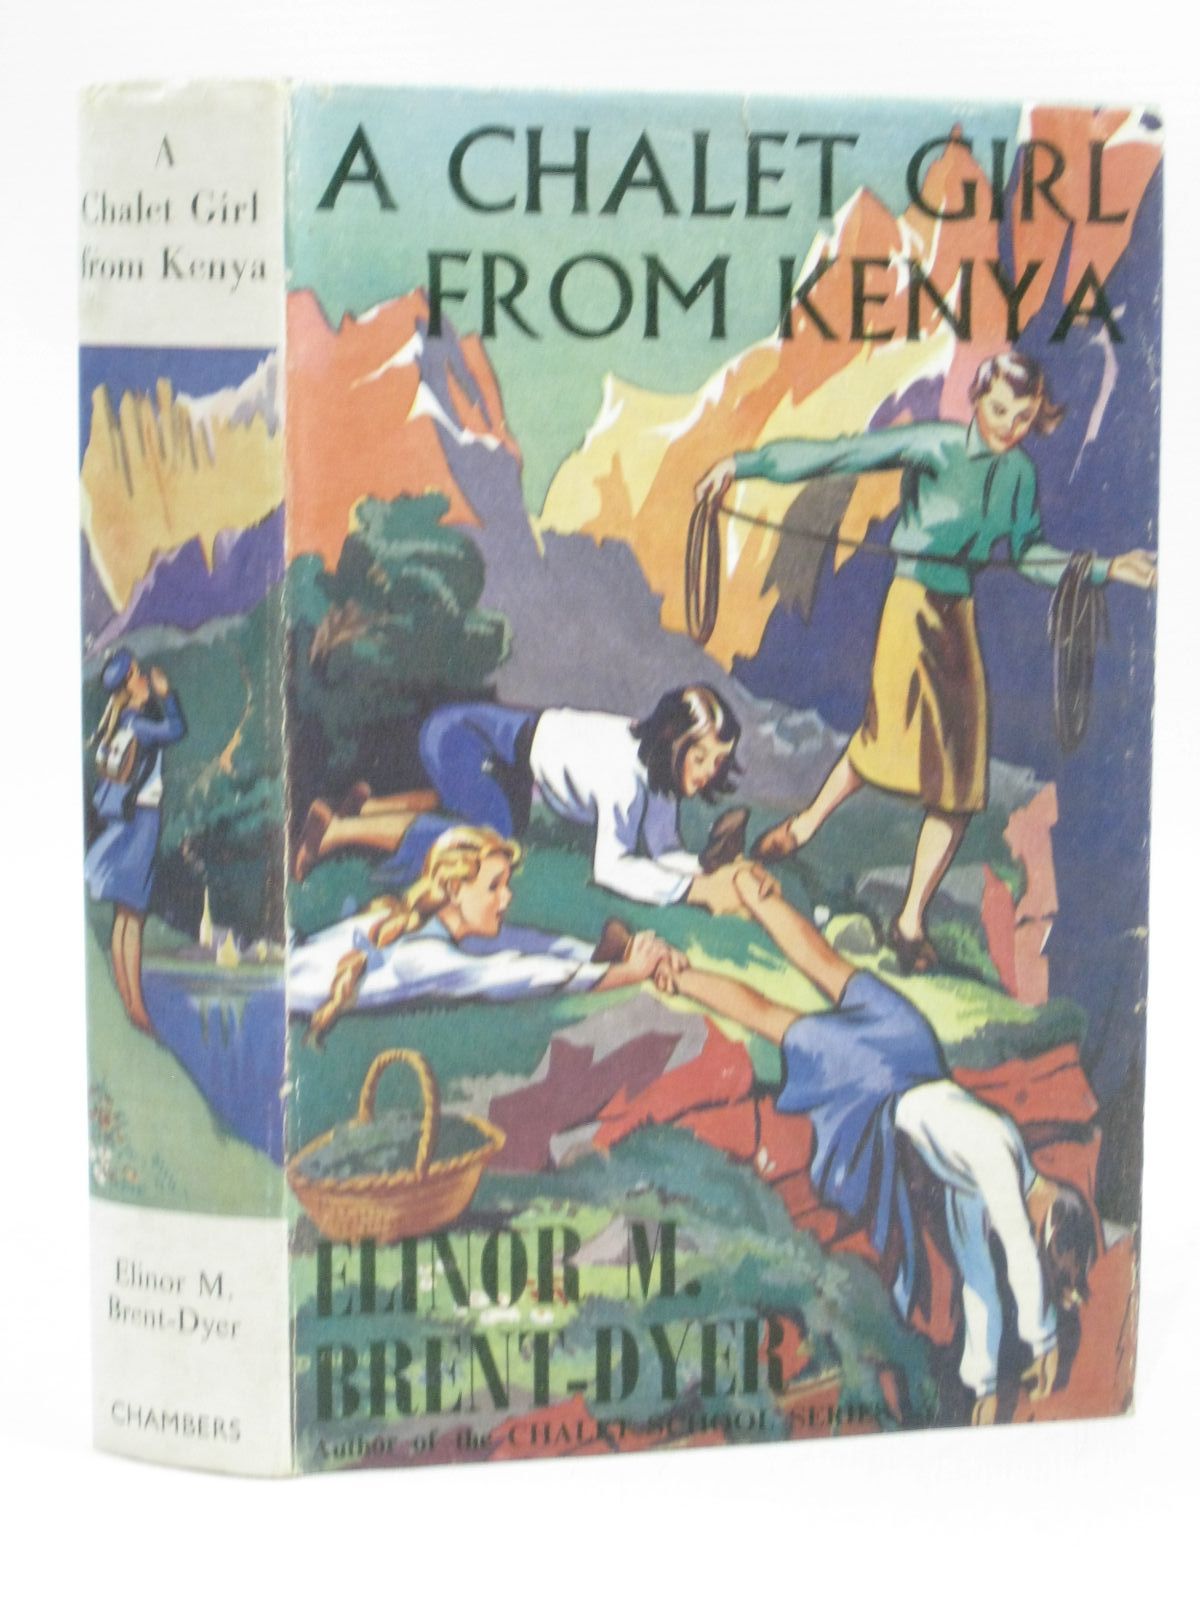 Cover of A CHALET GIRL FROM KENYA by Elinor M. Brent-Dyer